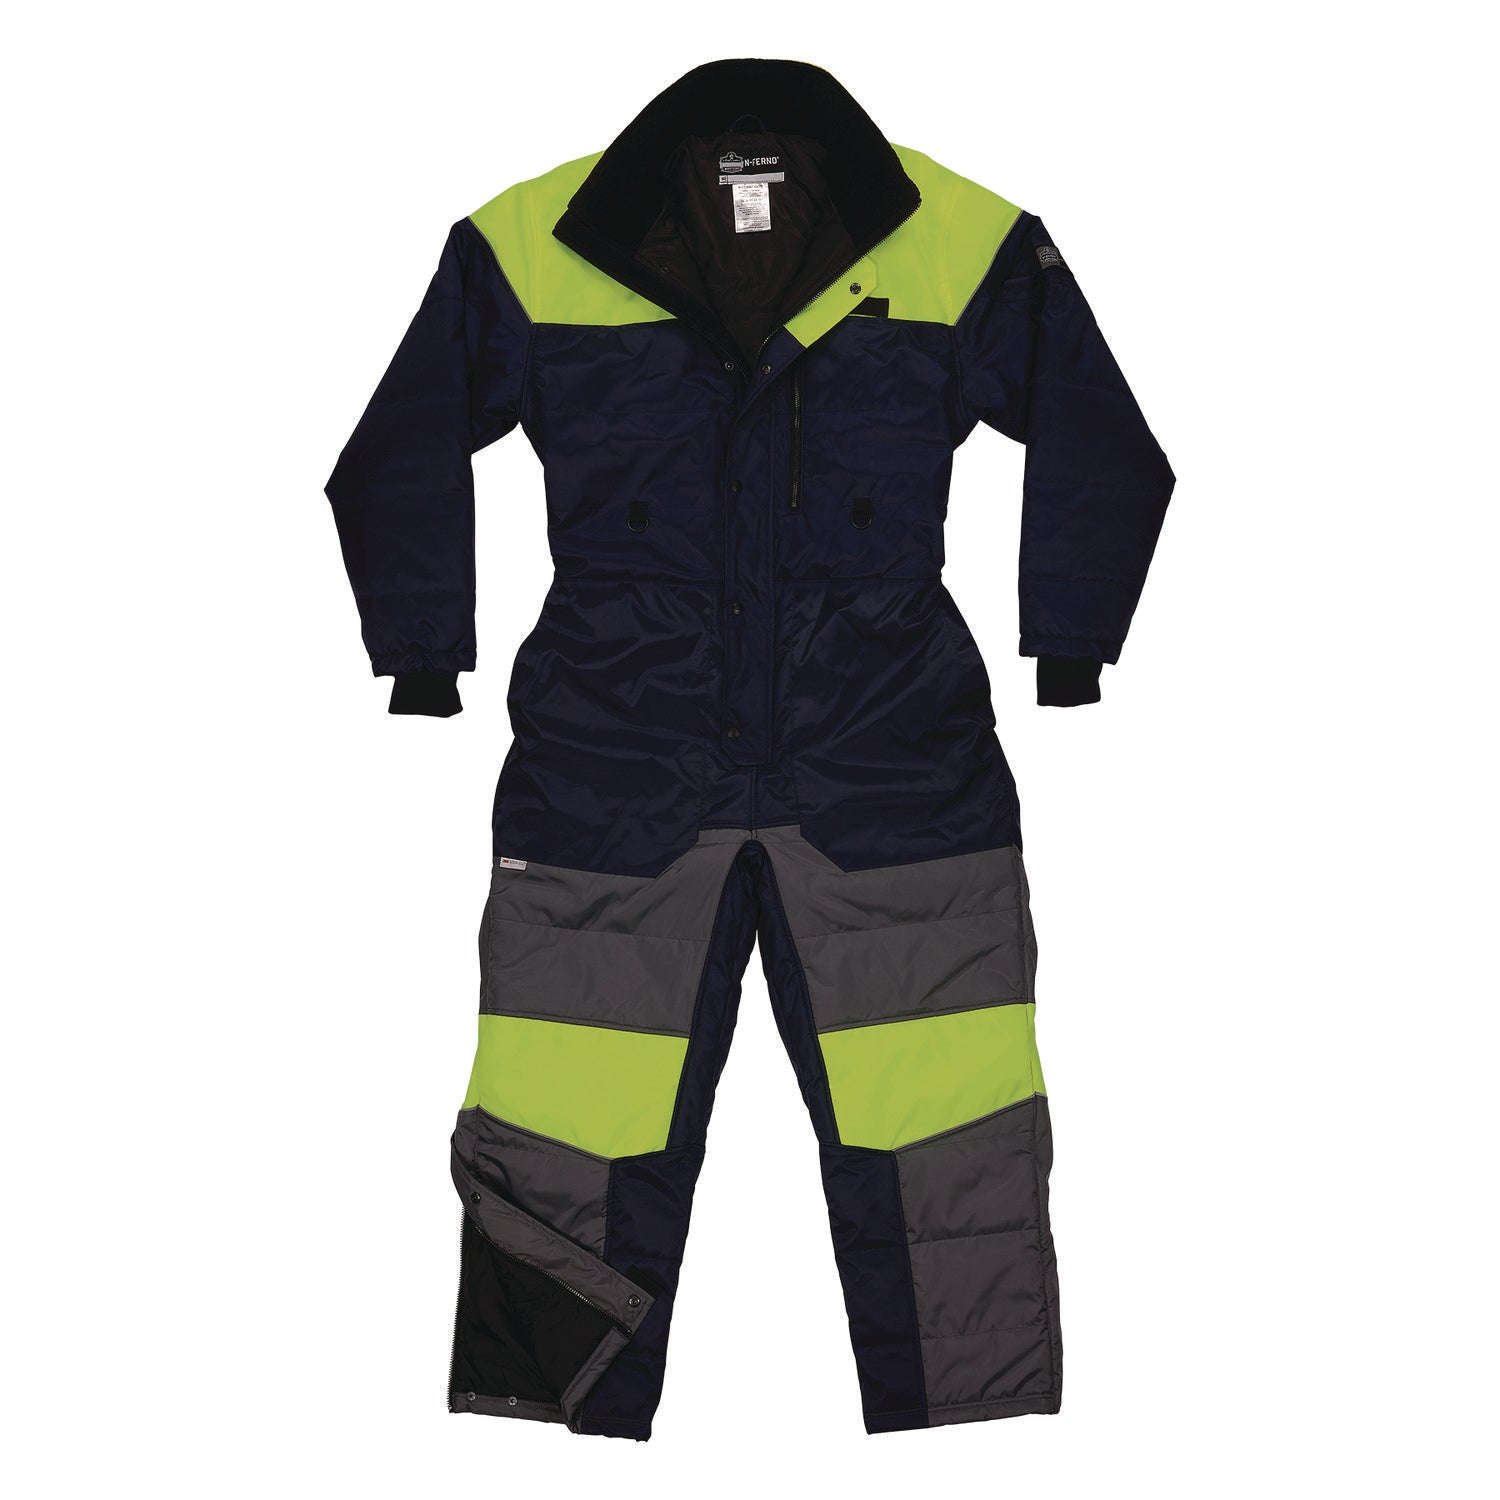 n-ferno-6475-insulated-freezer-coverall-5x-large-navy-ships-in-1-3-business-days_ego41249 - 1